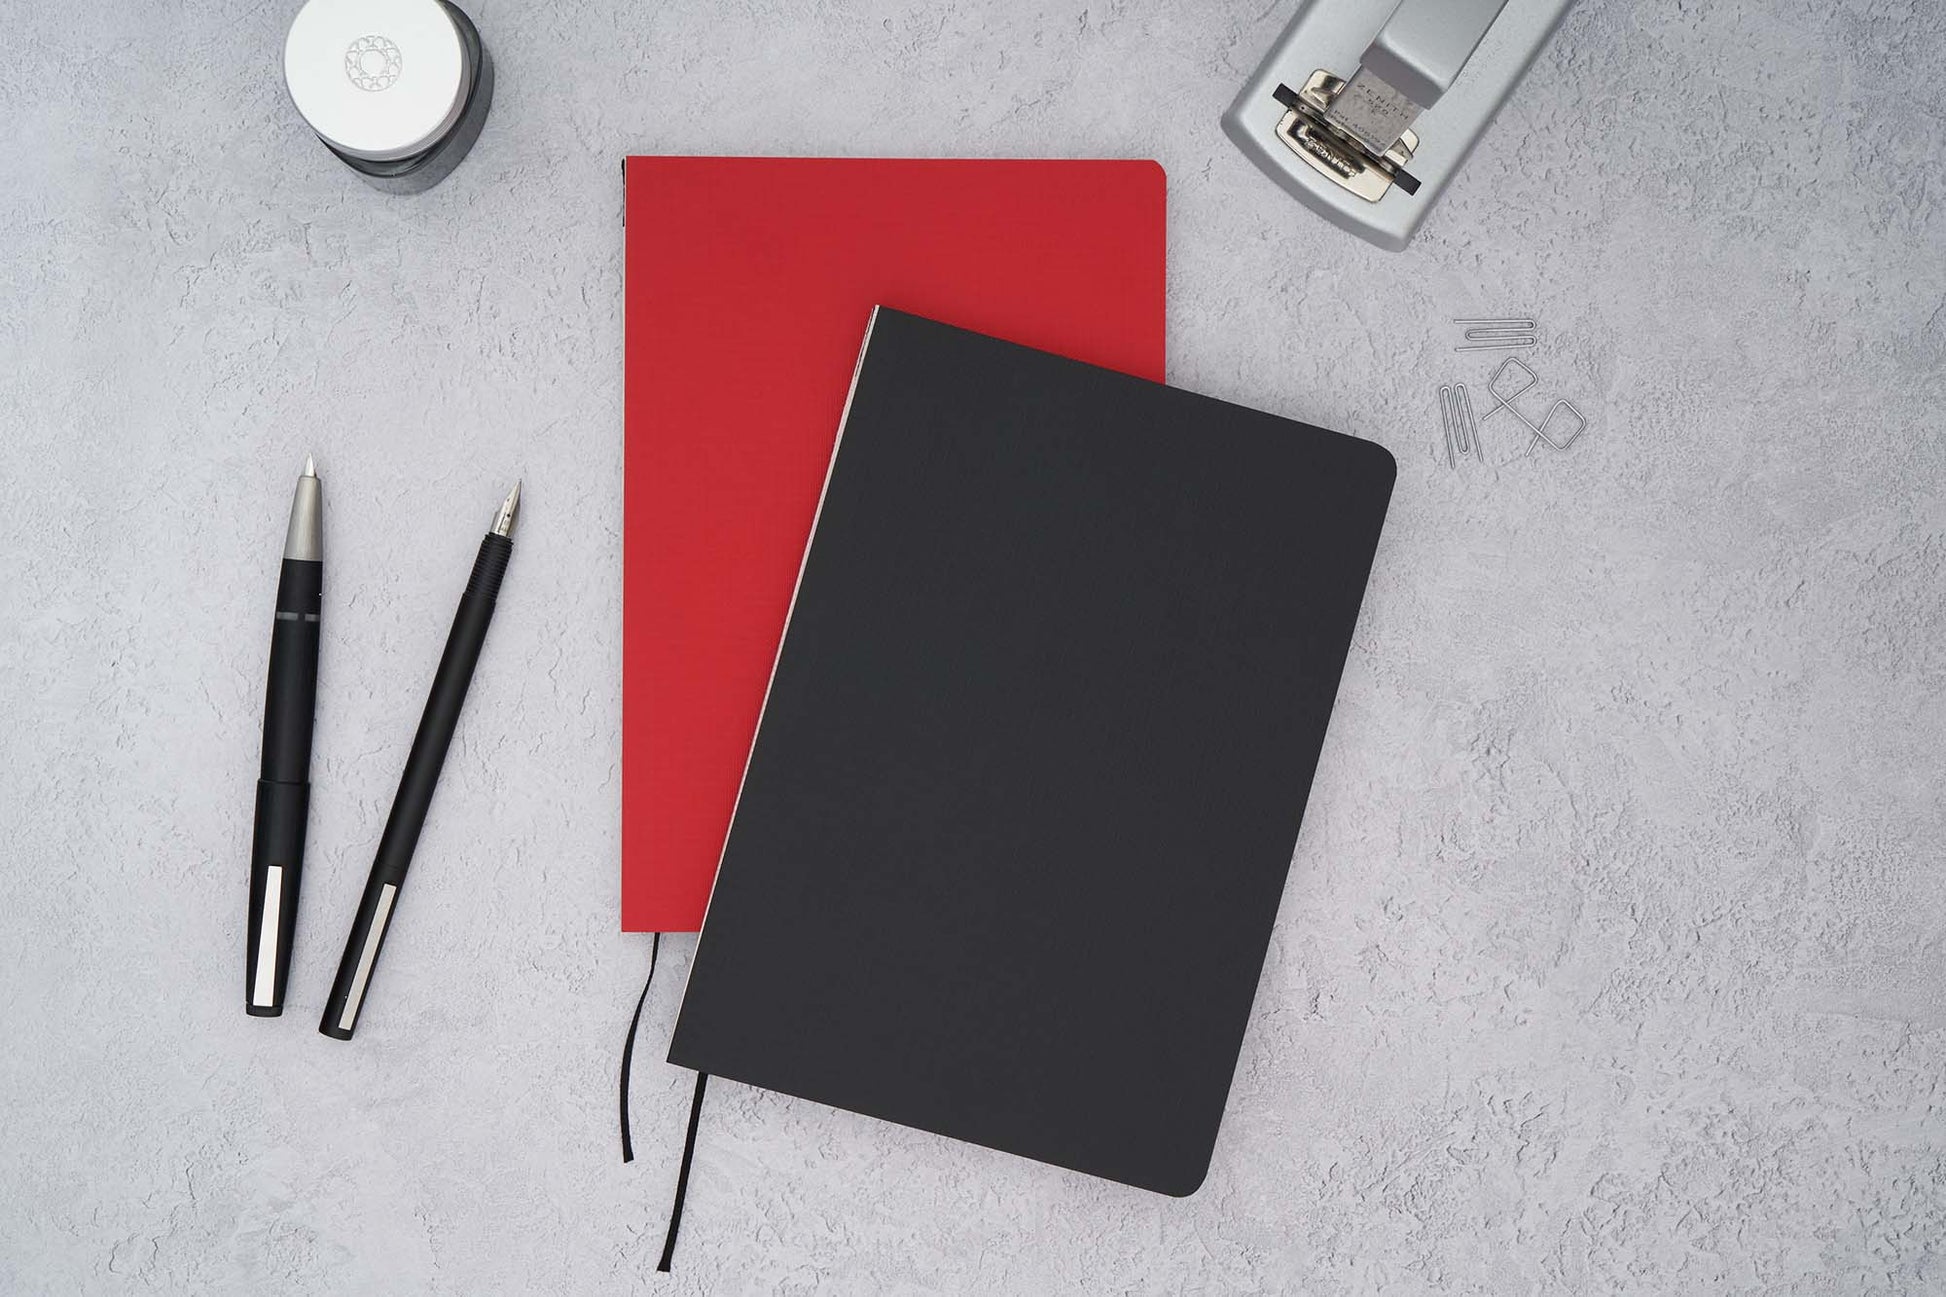 Mitsubishi Bank Paper Notebook  Notebook for Fountain Pens – The Paper Mind